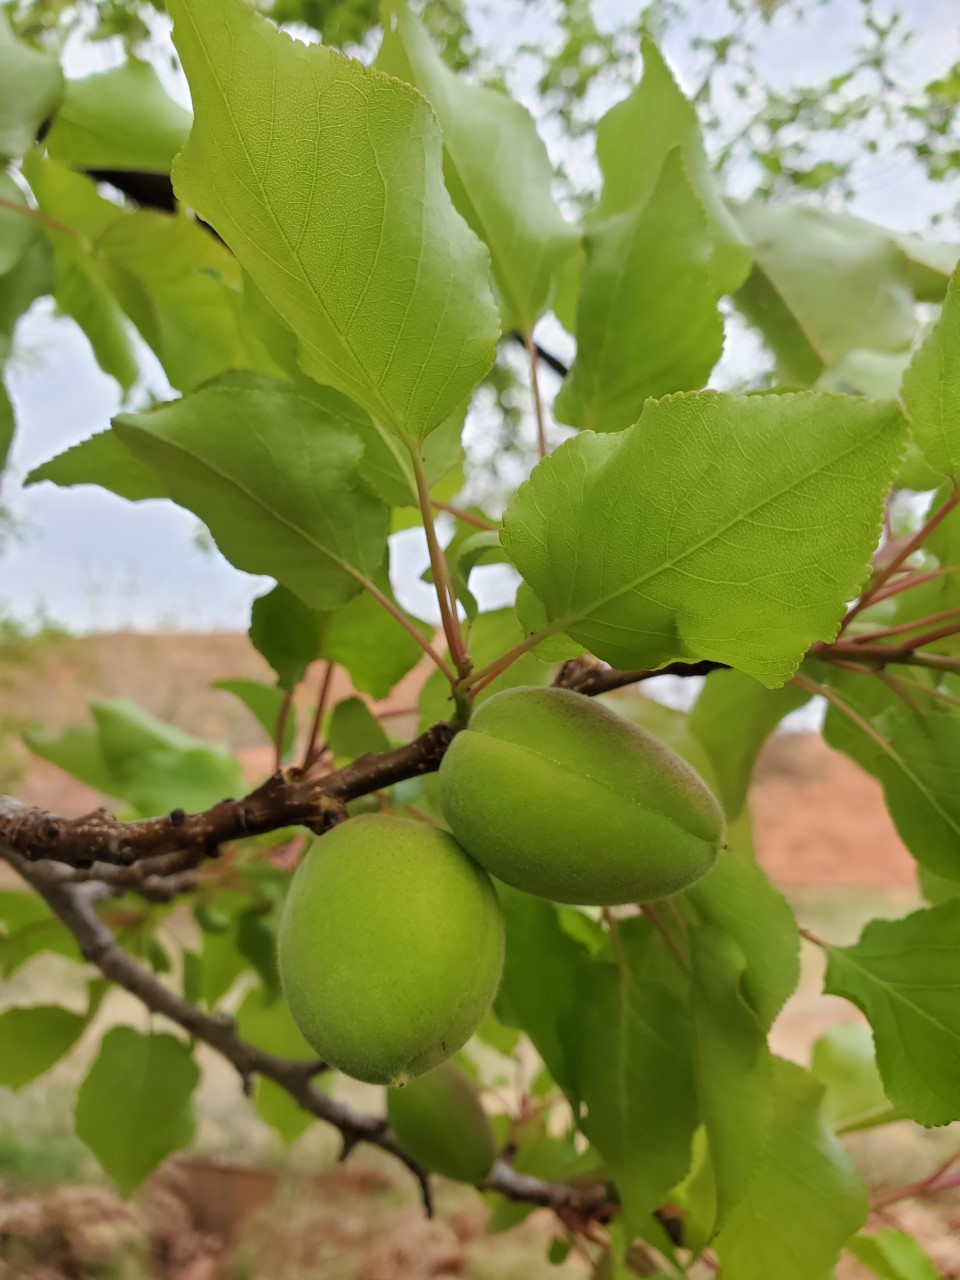 Two green oval shaped fruits on a branch surrounded by leaves